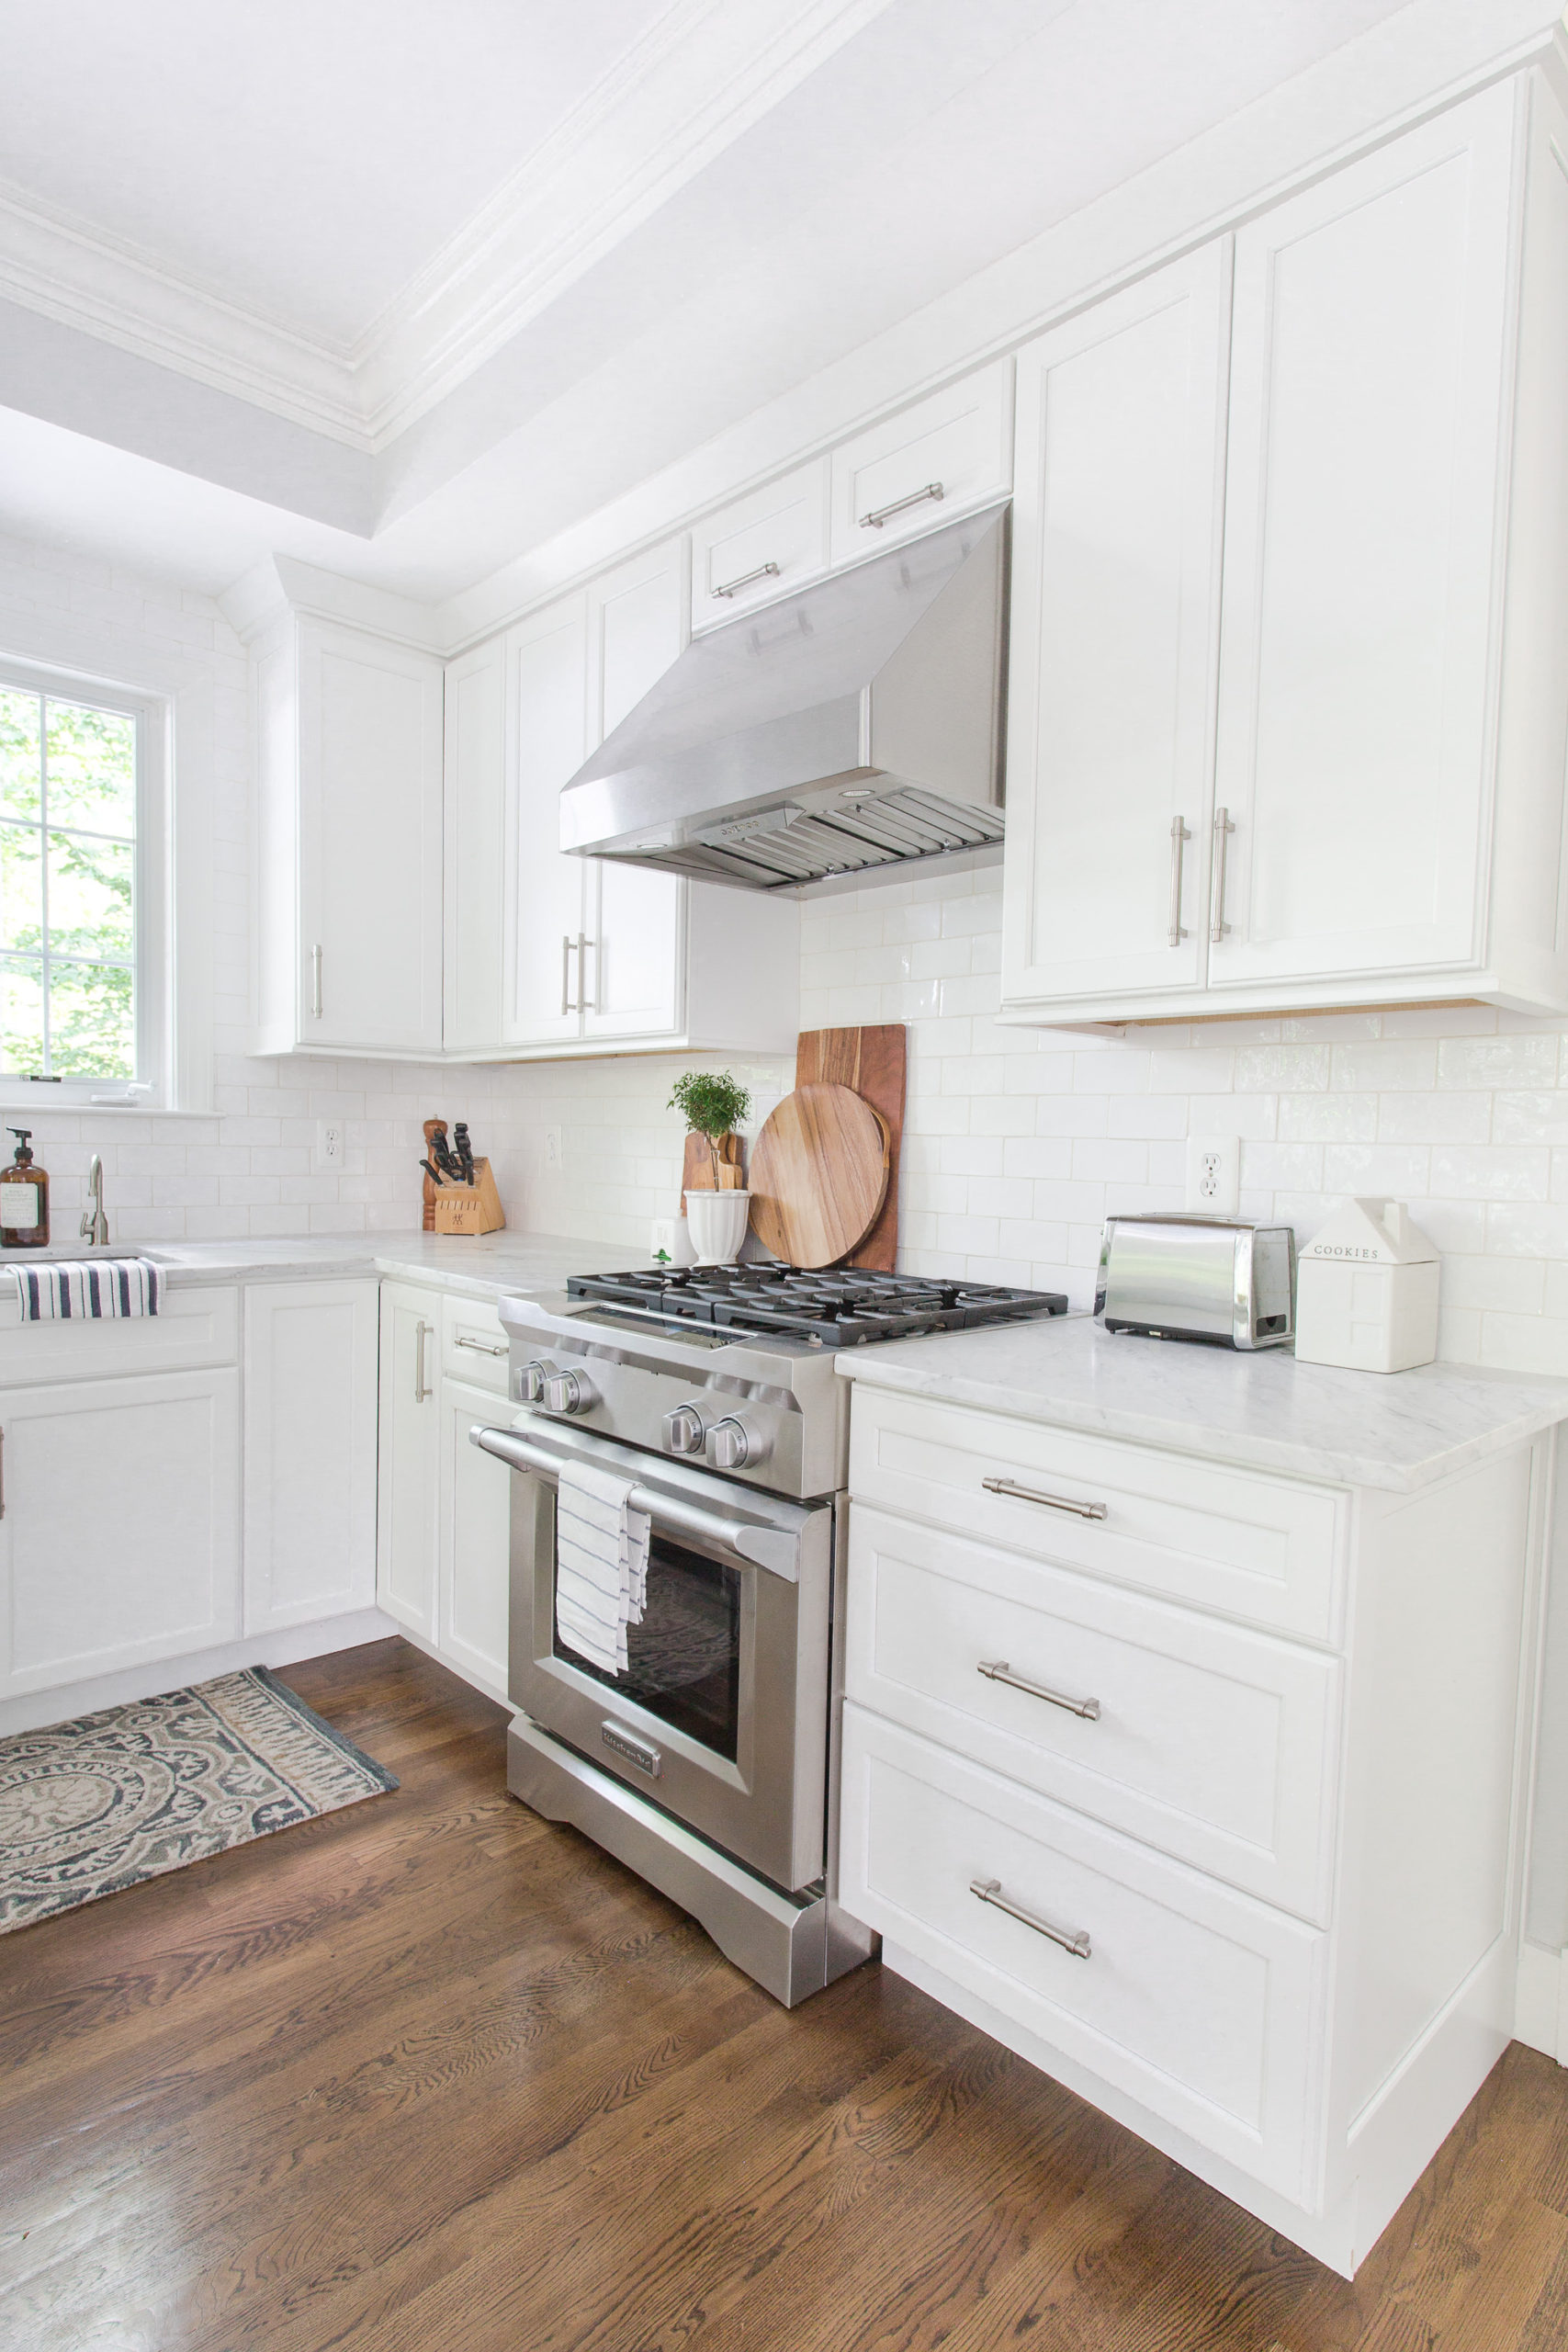 Gas range in white kitchen with dark wood floors. On the counter there is a cookie jar, wooden trays and toaster oven